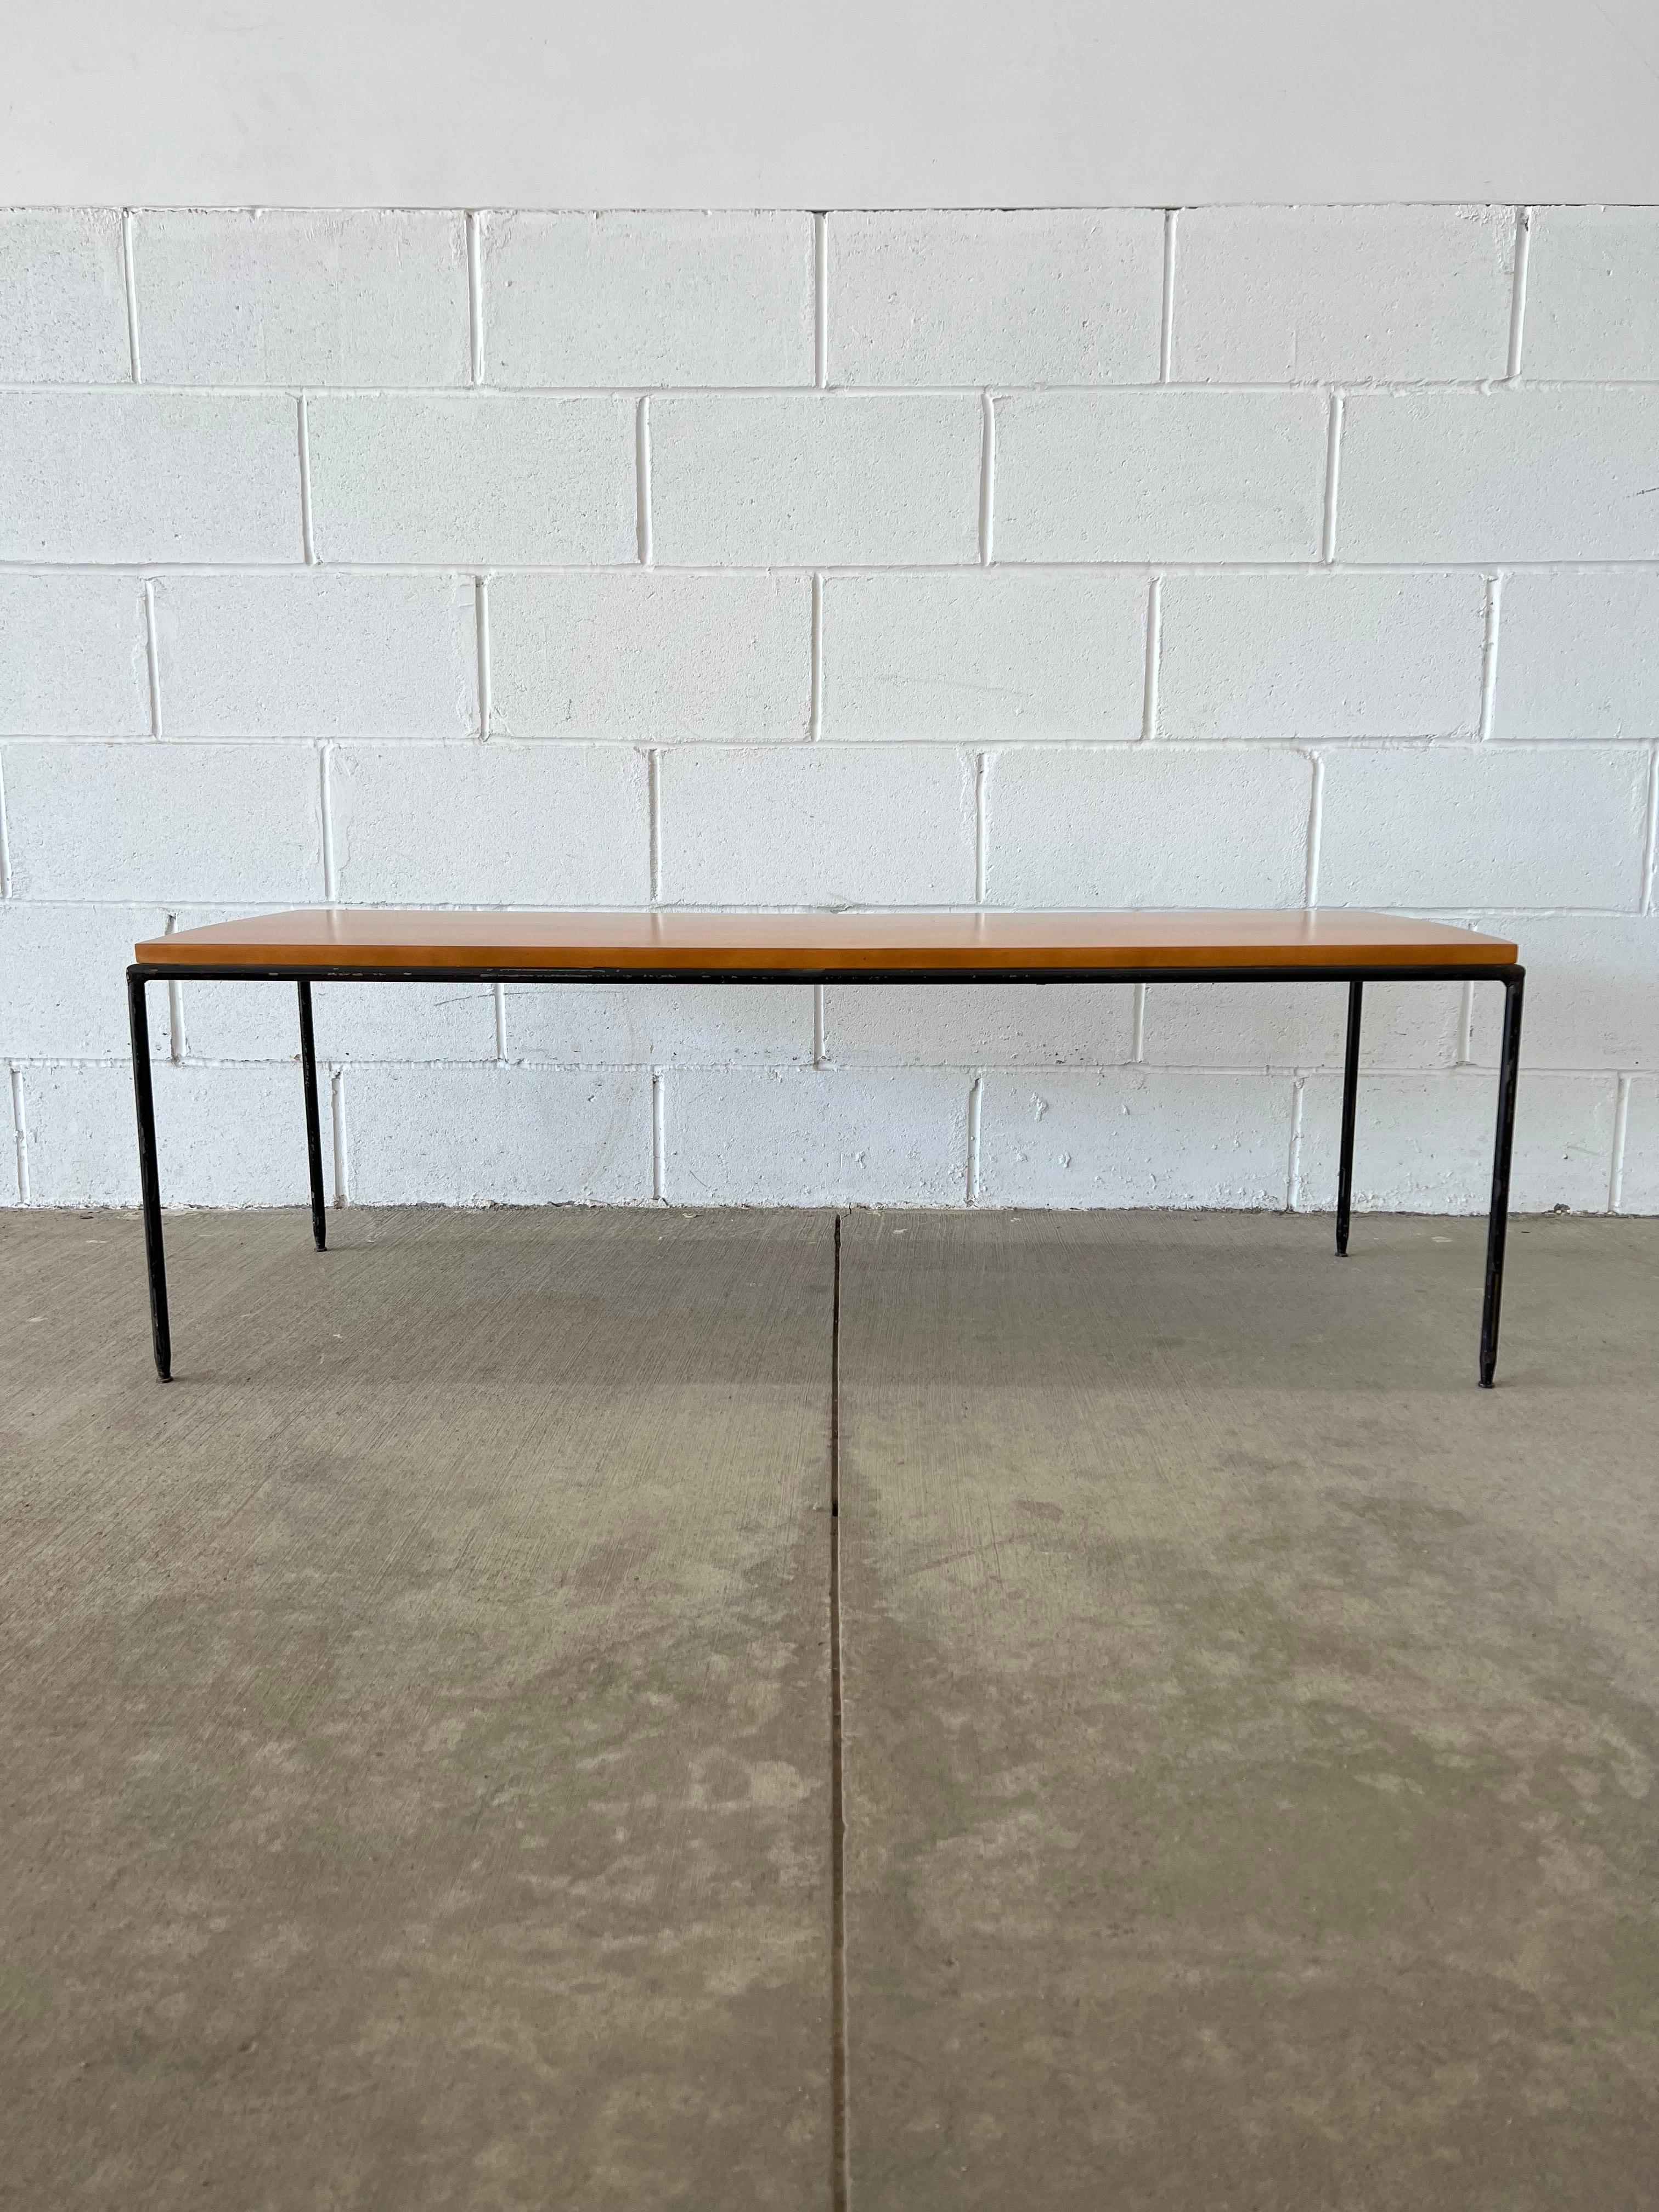 Paul McCobb bench - use it as a seat, a table, or a platform for other Planner Group pieces. 

Versatile and timeless.